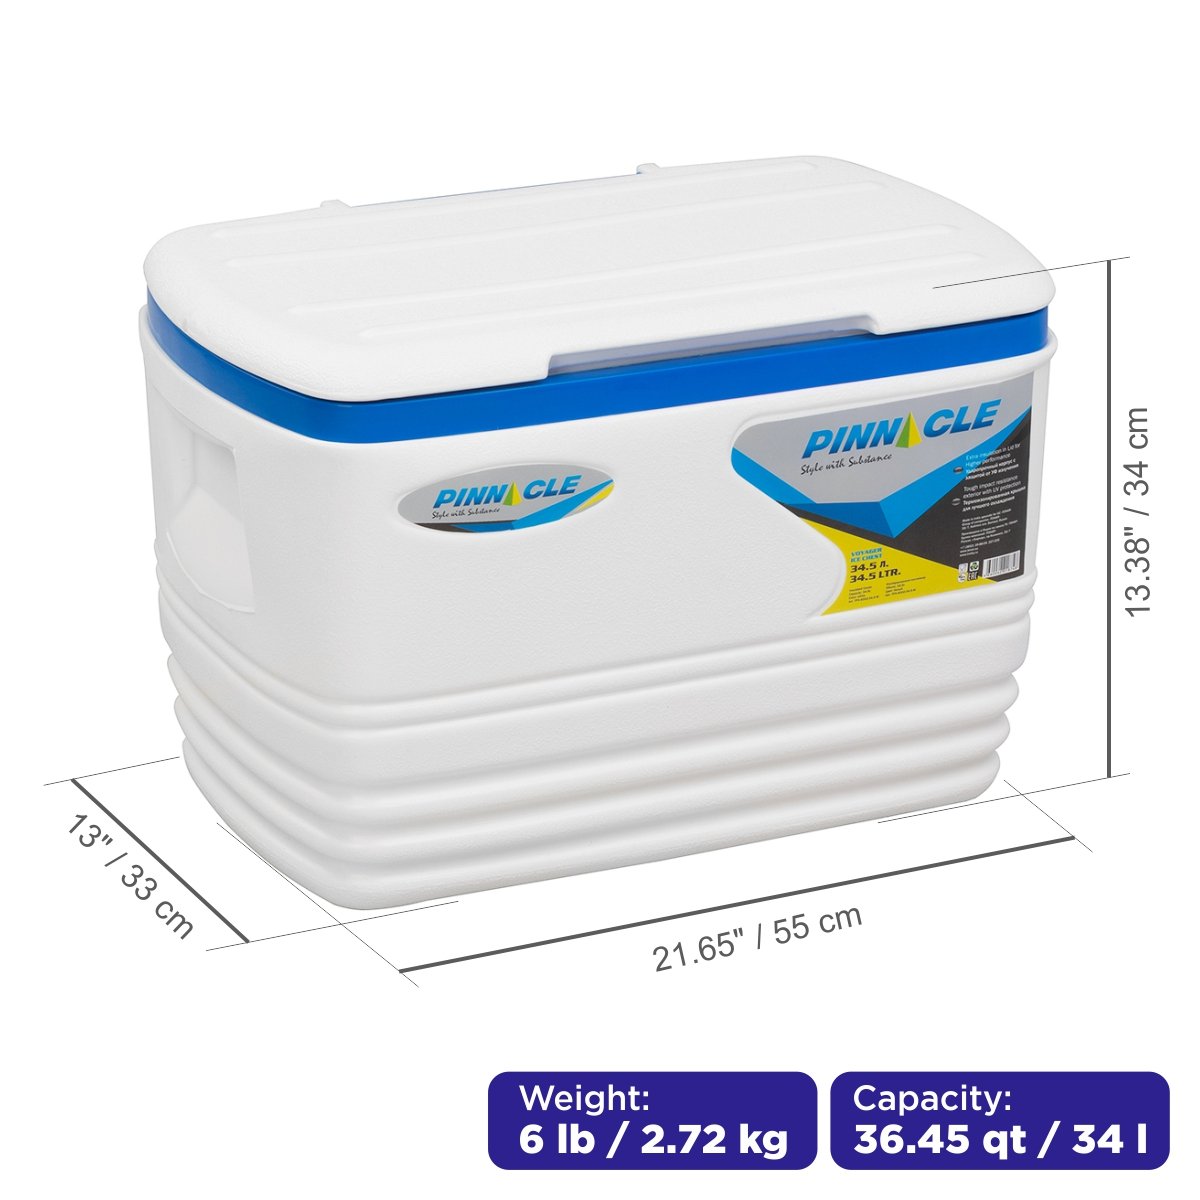 Voyager Big Camping Hard-Side Ice Chest, 36 qt is 21.7 inches long, 13 inches wide and 13.4 inches high, weighing 6 lbs